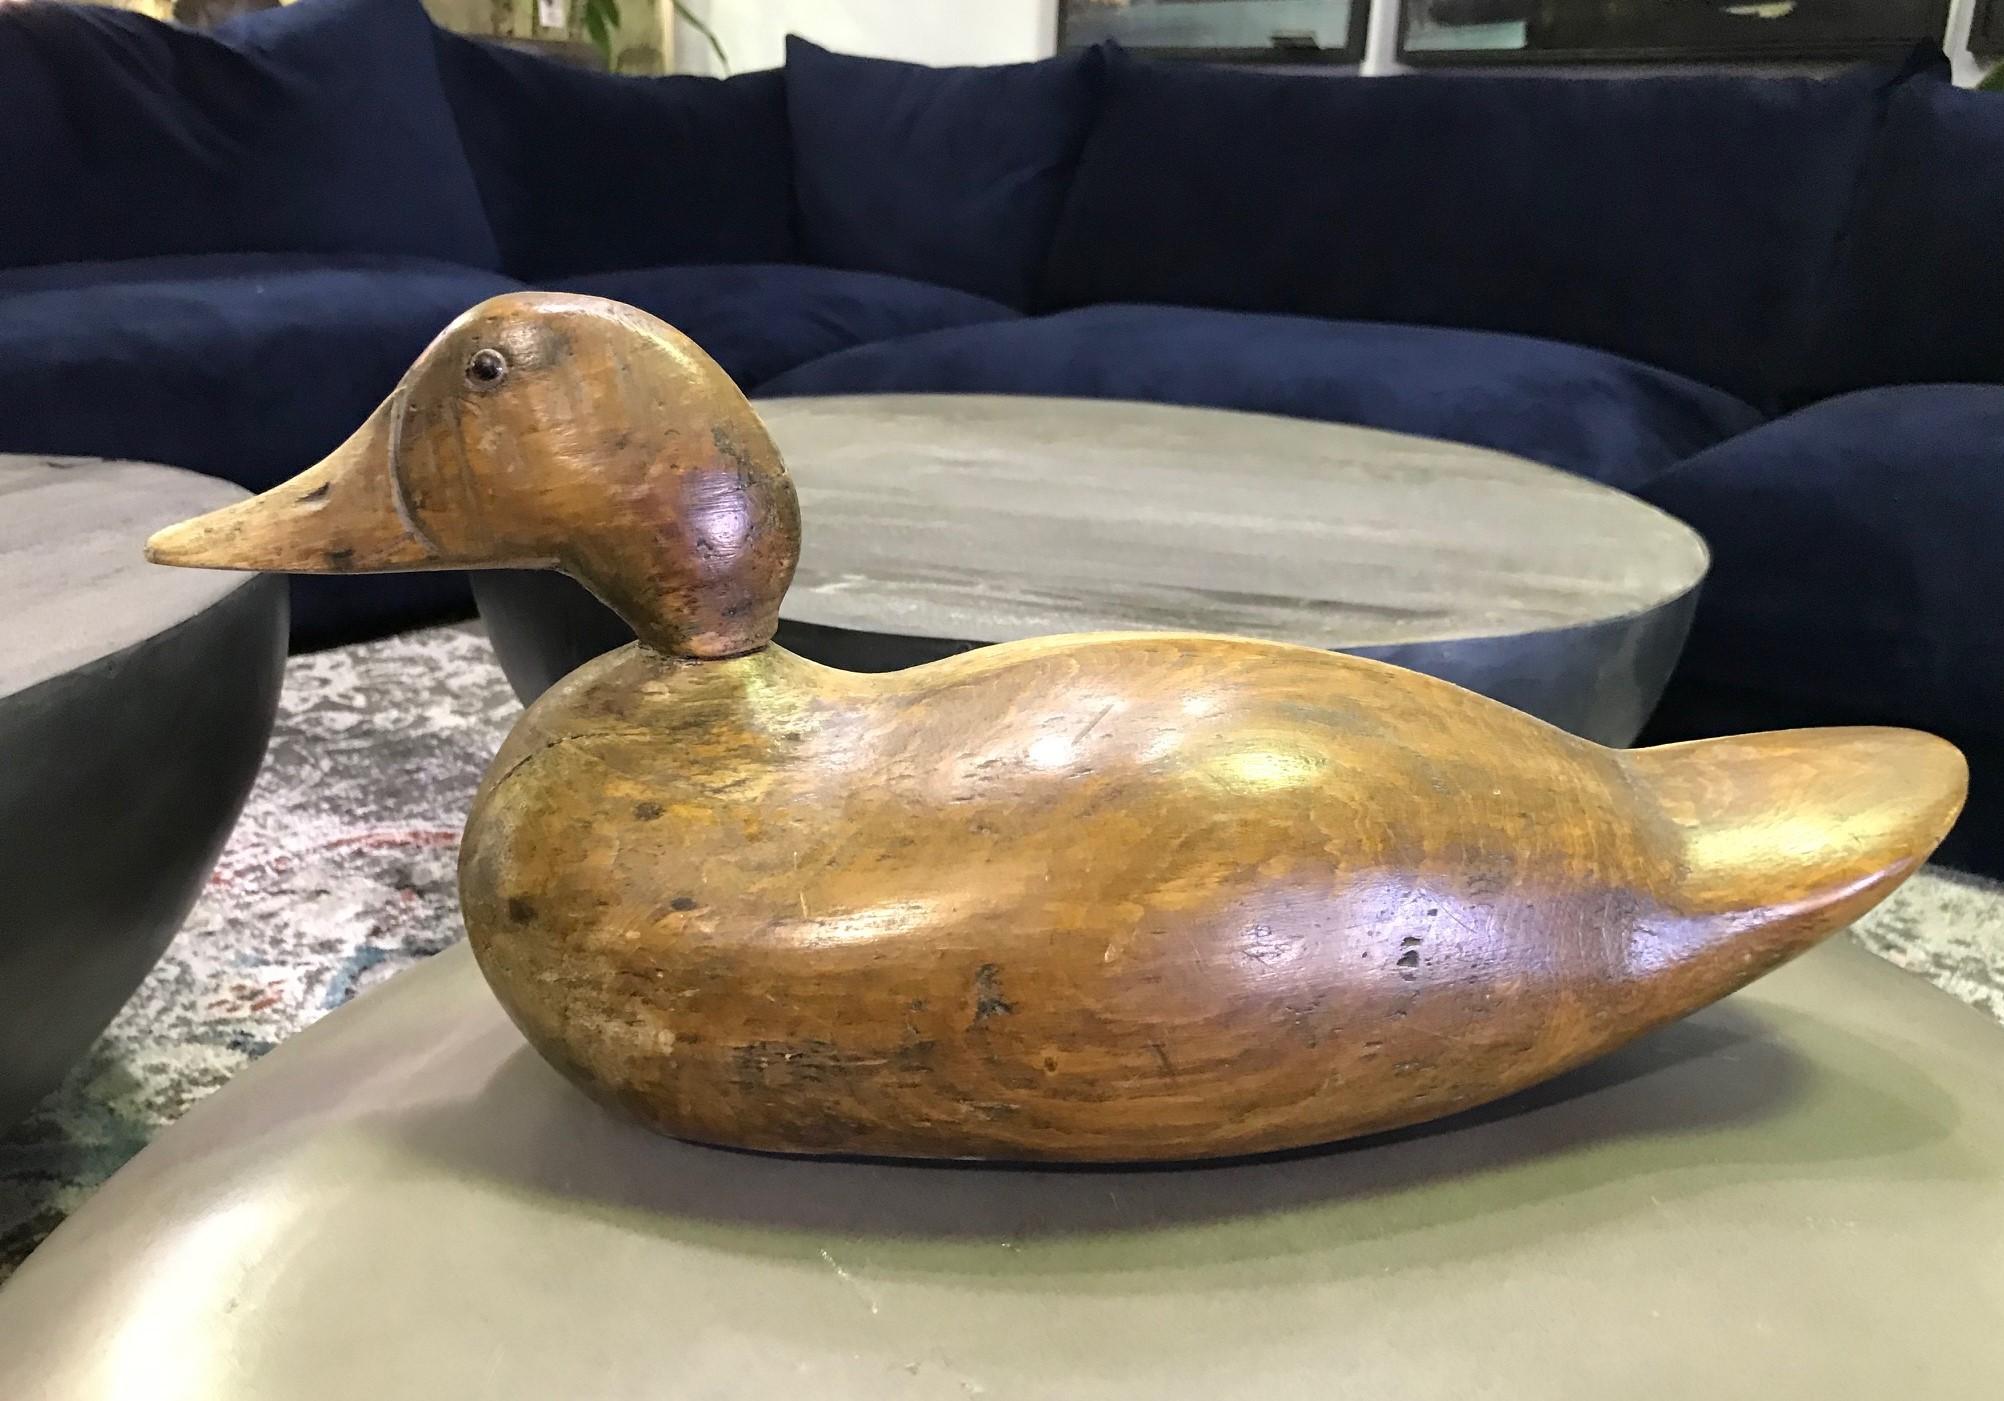 A fantastic early to mid-20th century handmade duck decoy with bead eyes. Beautiful dark wood and rich patina.

Would be a great addition to any collection or eye-catching stand-alone accent piece in about any setting.

Dimensions: 7.5